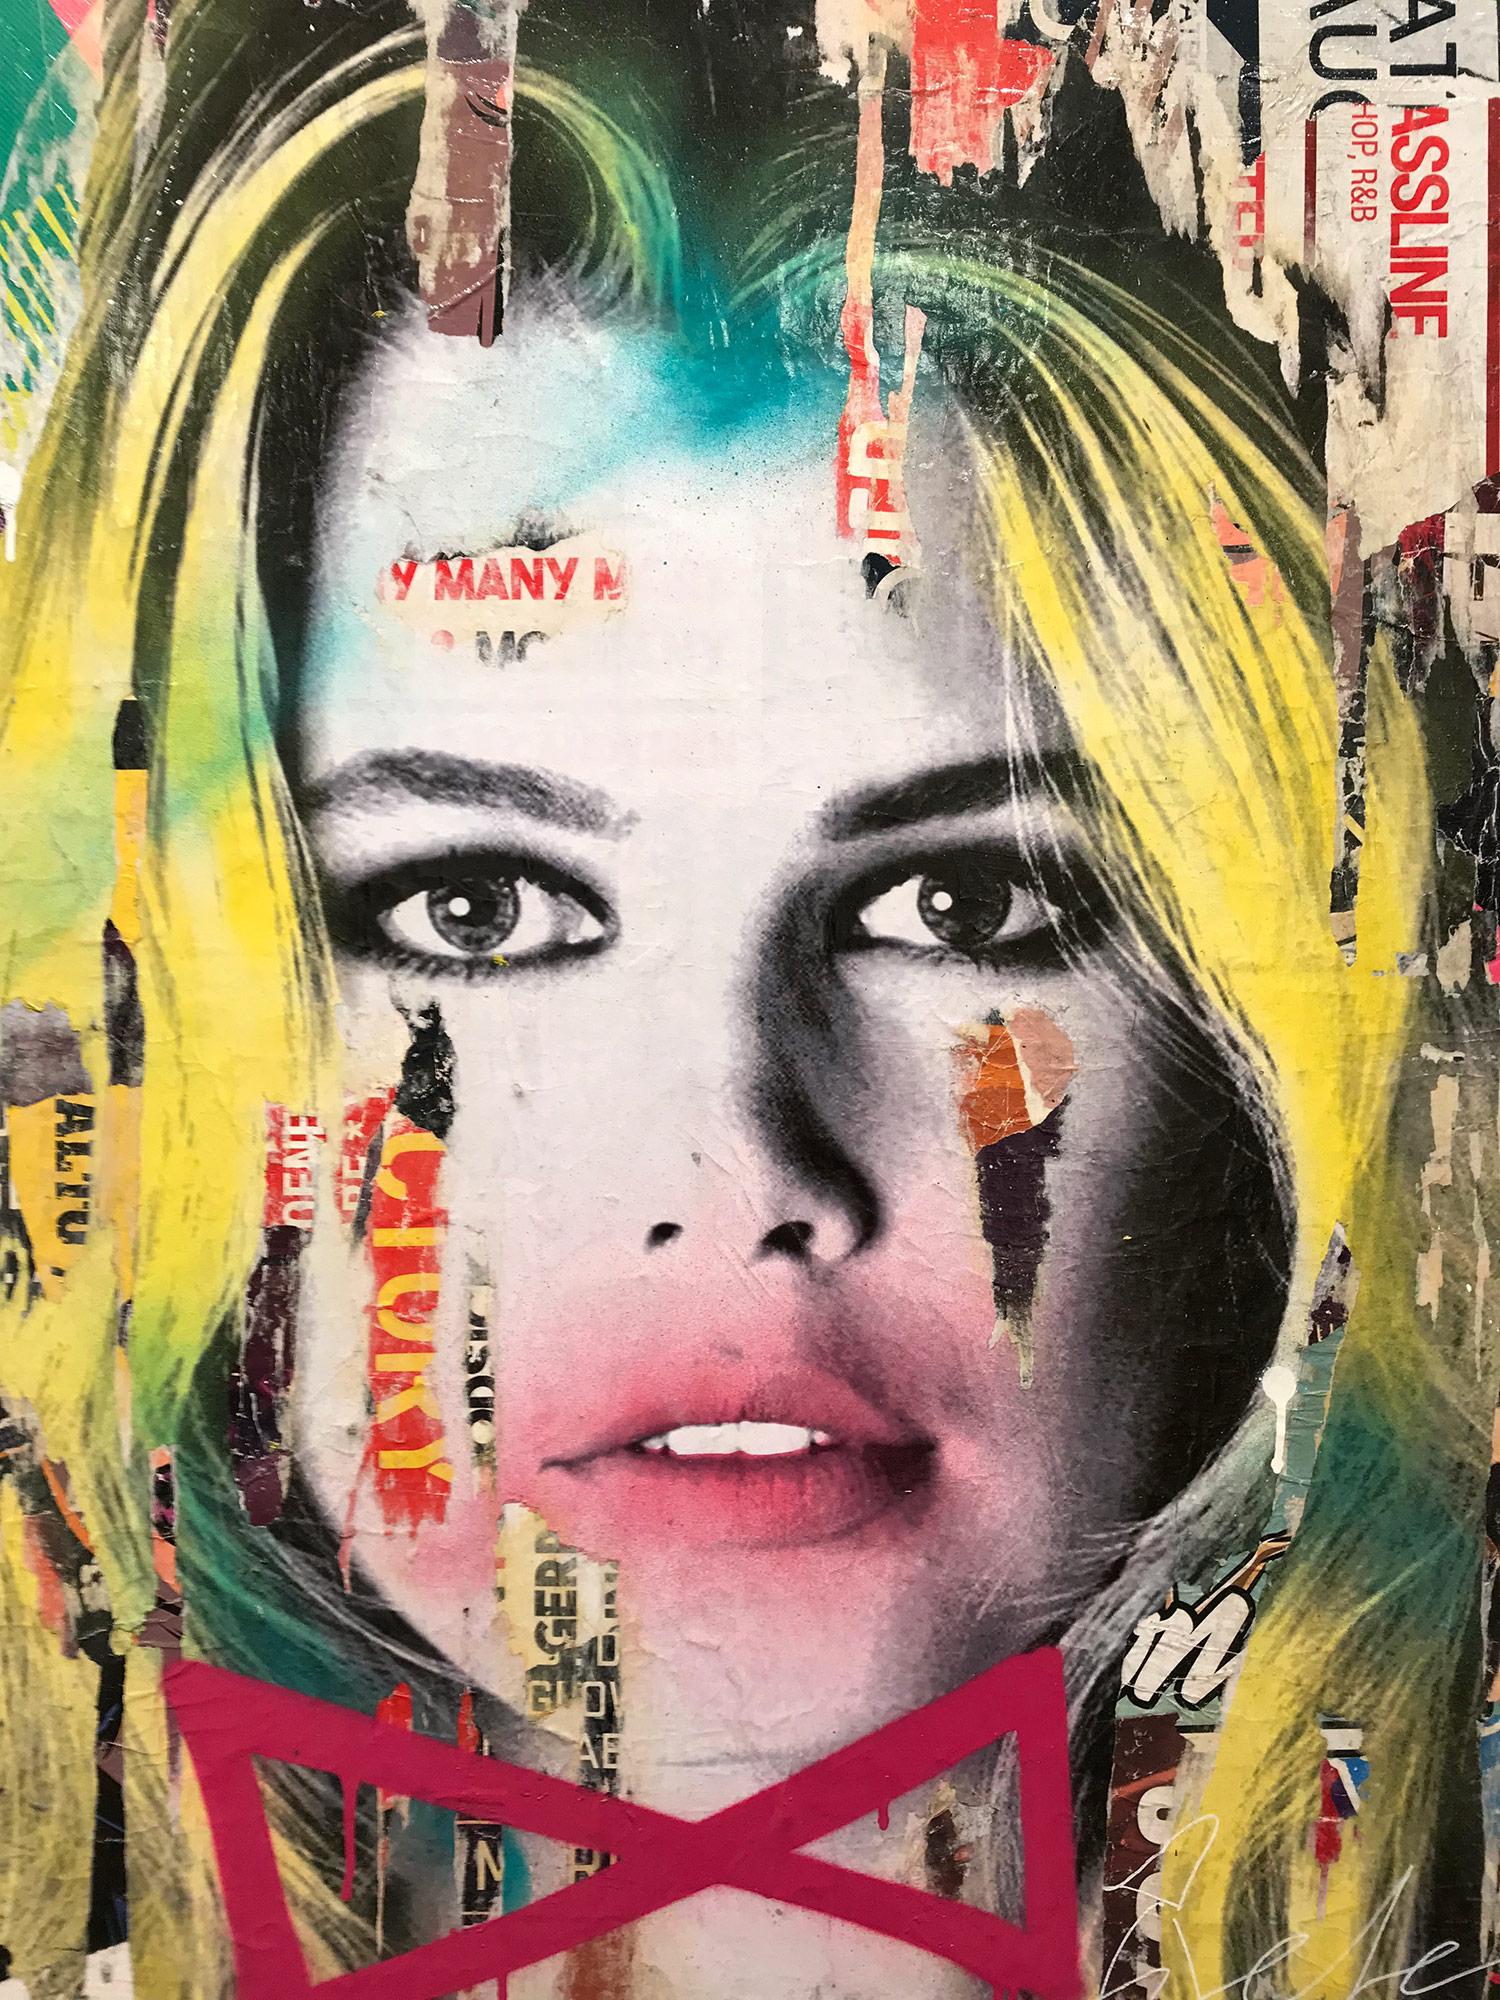 From Nothing to Nowhere (Claudia Schiffer) - Painting by Gieler